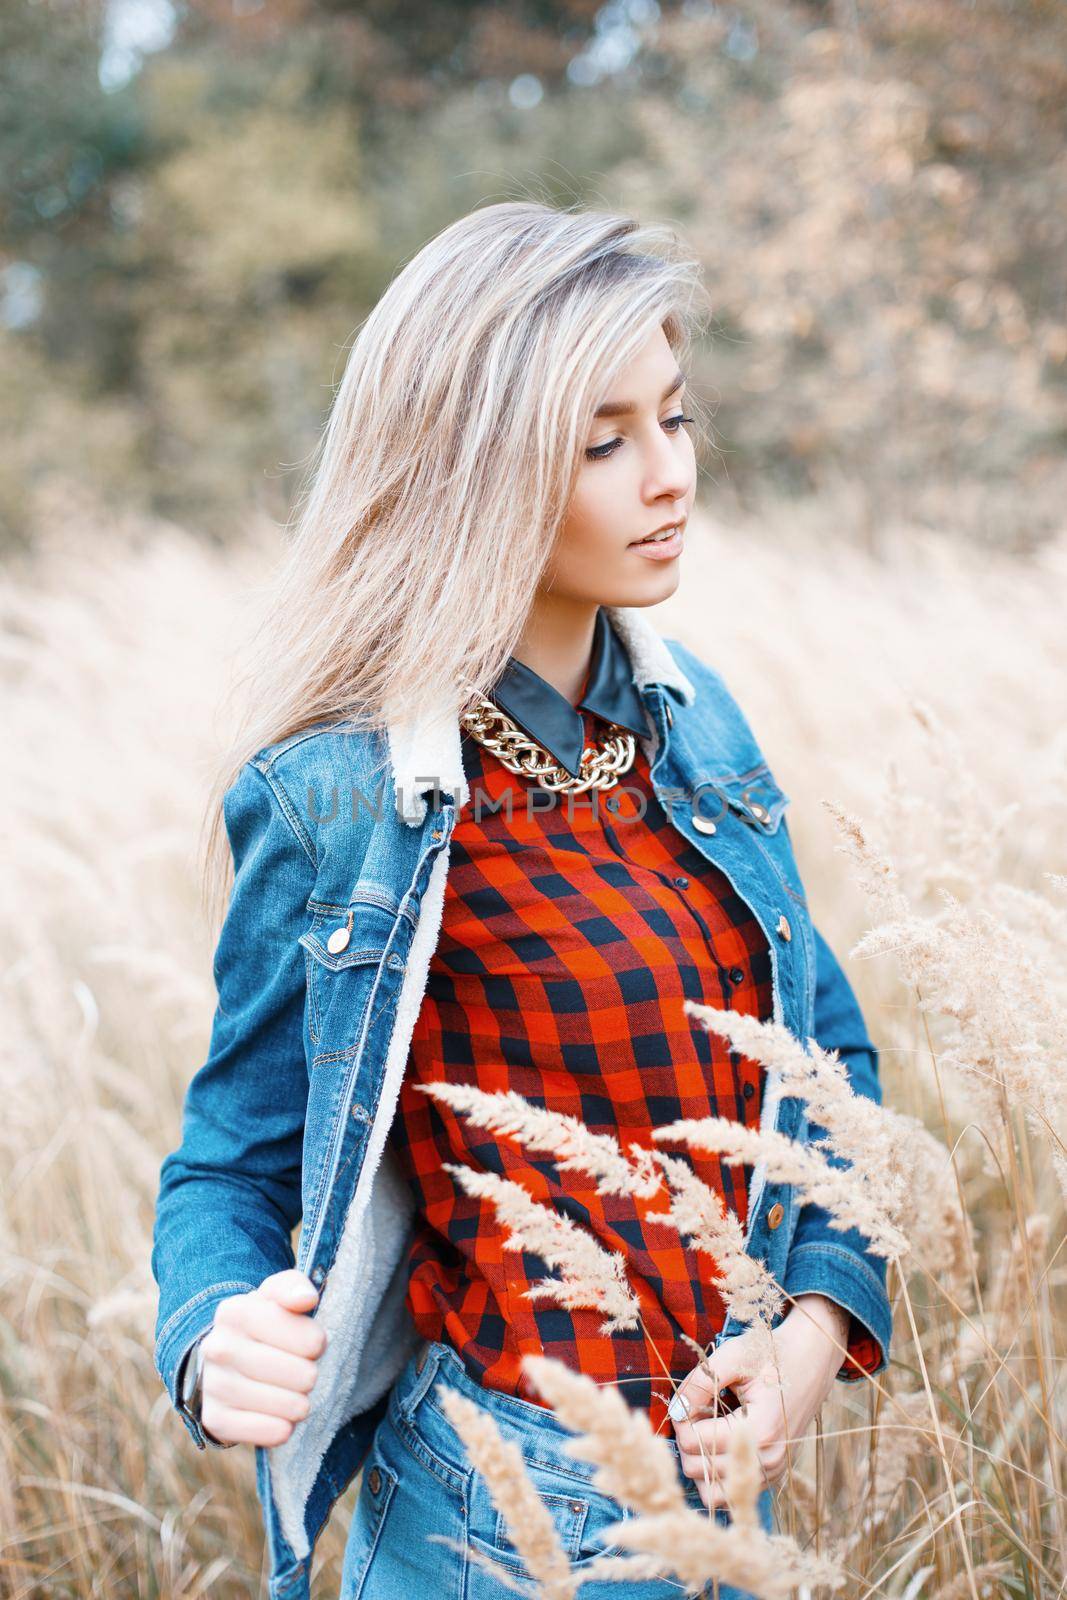 Fashionable stylish girl in a denim dress and a red checkered shirt in the autumn field with grass